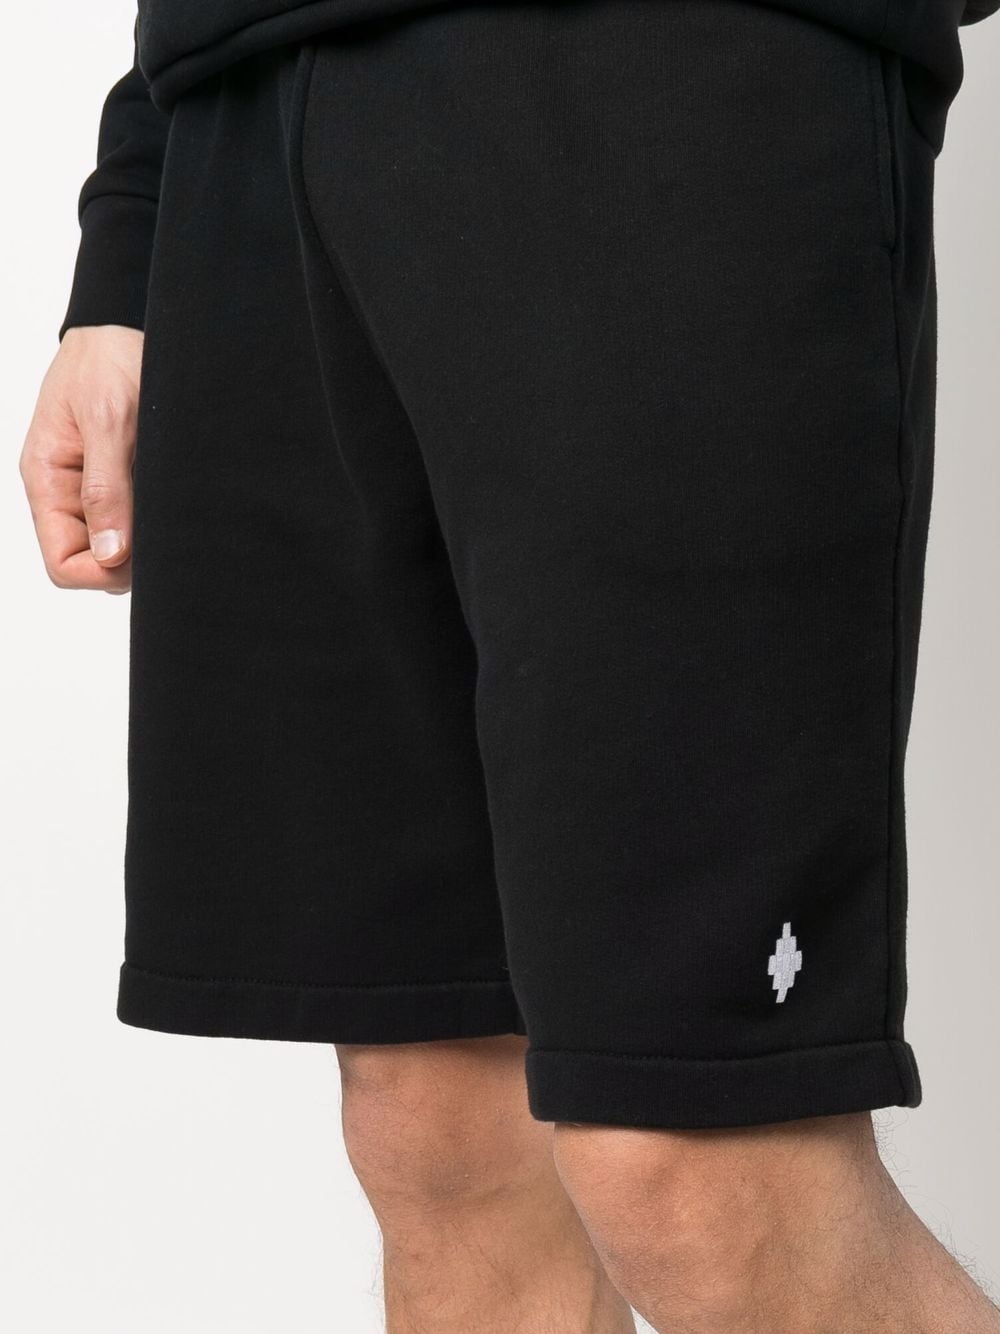 embroidered-motif track shorts - 5